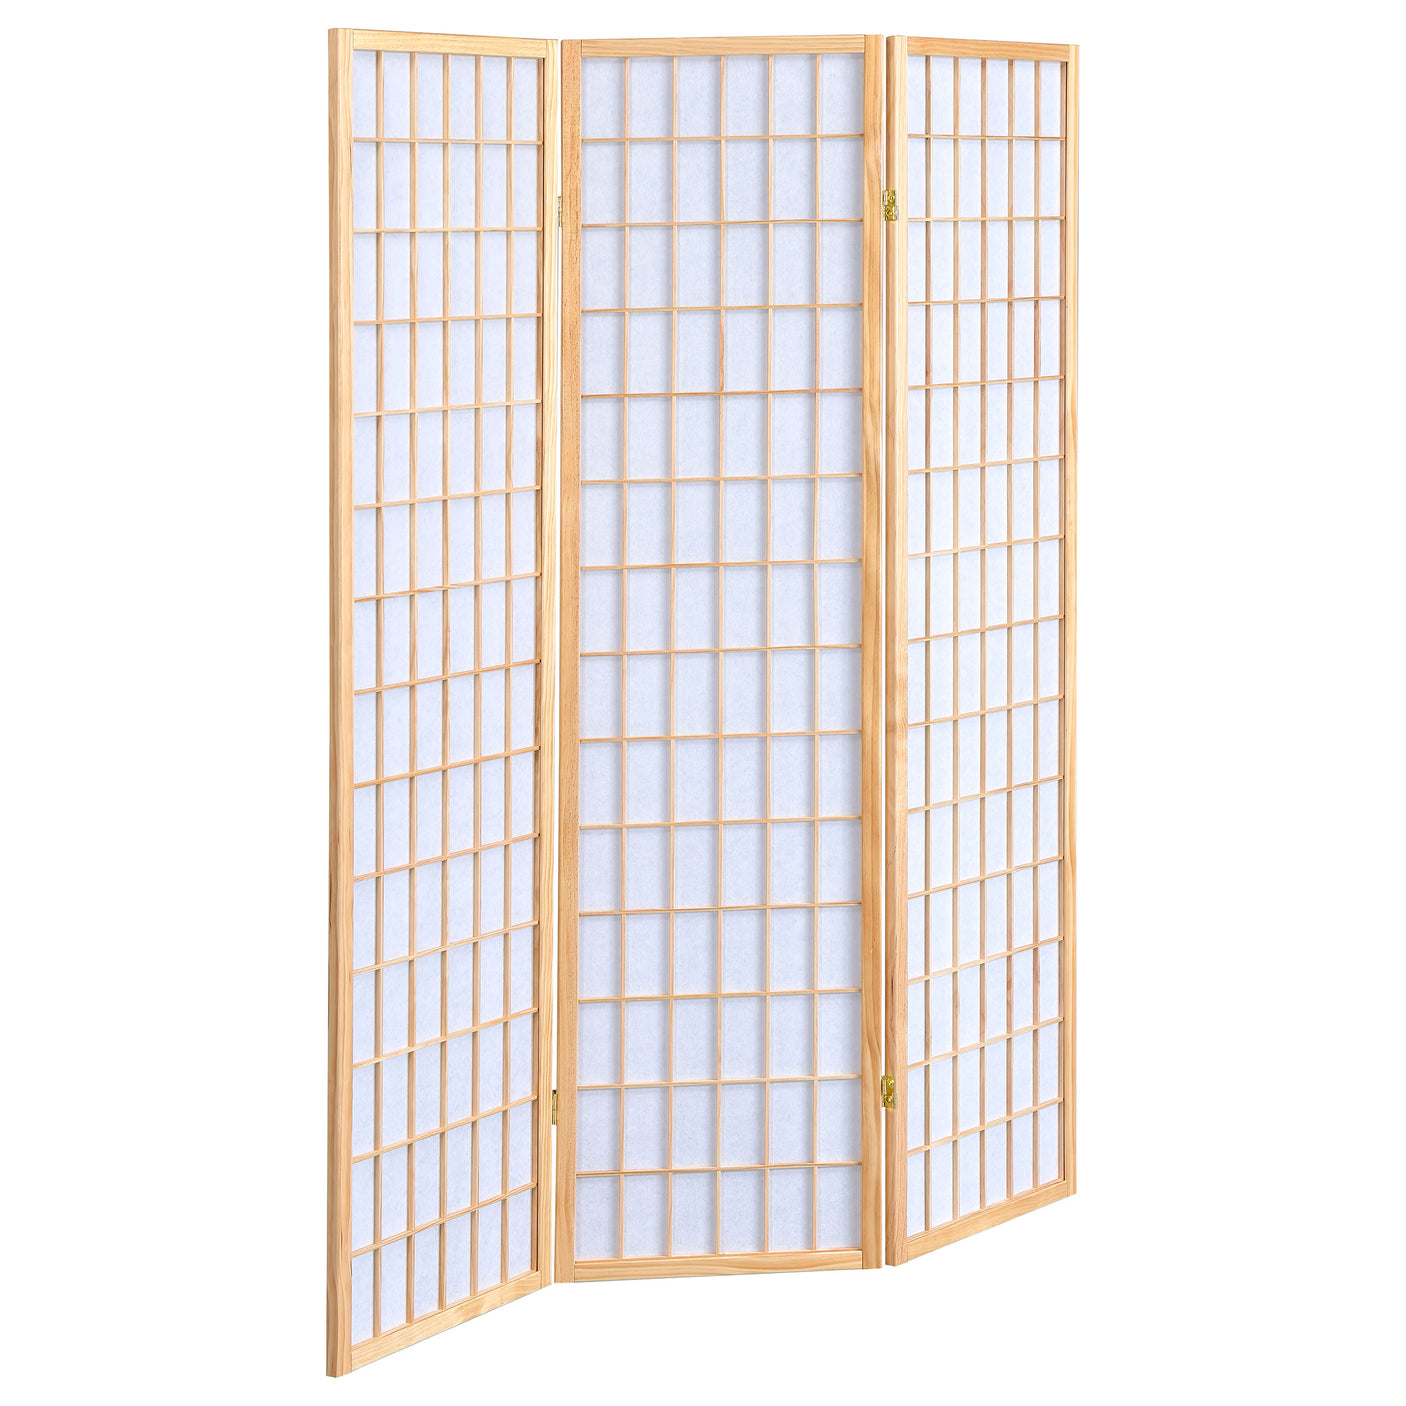 3 Panel Room Divider - Carrie 3-panel Folding Screen Natural and White